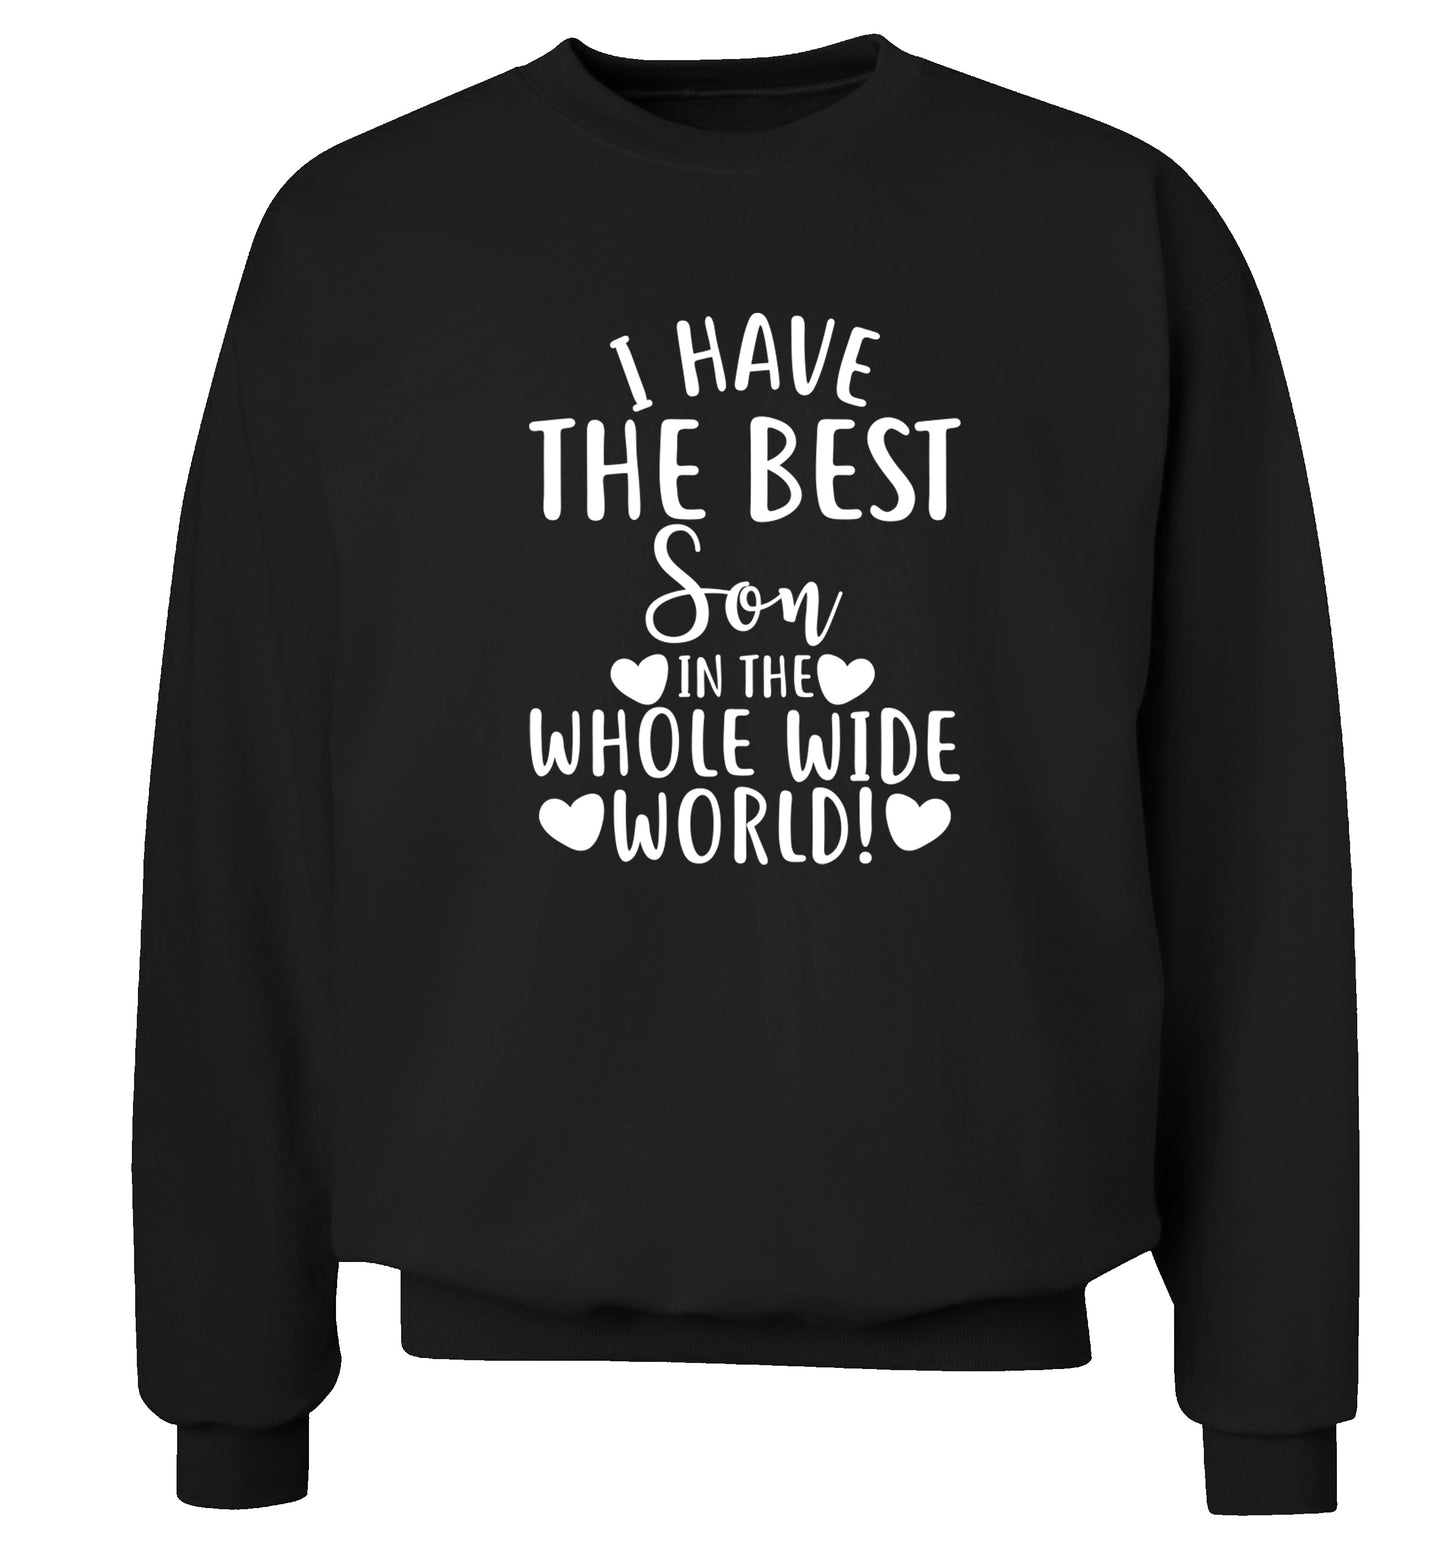 I have the best son in the whole wide world! Adult's unisex black Sweater 2XL